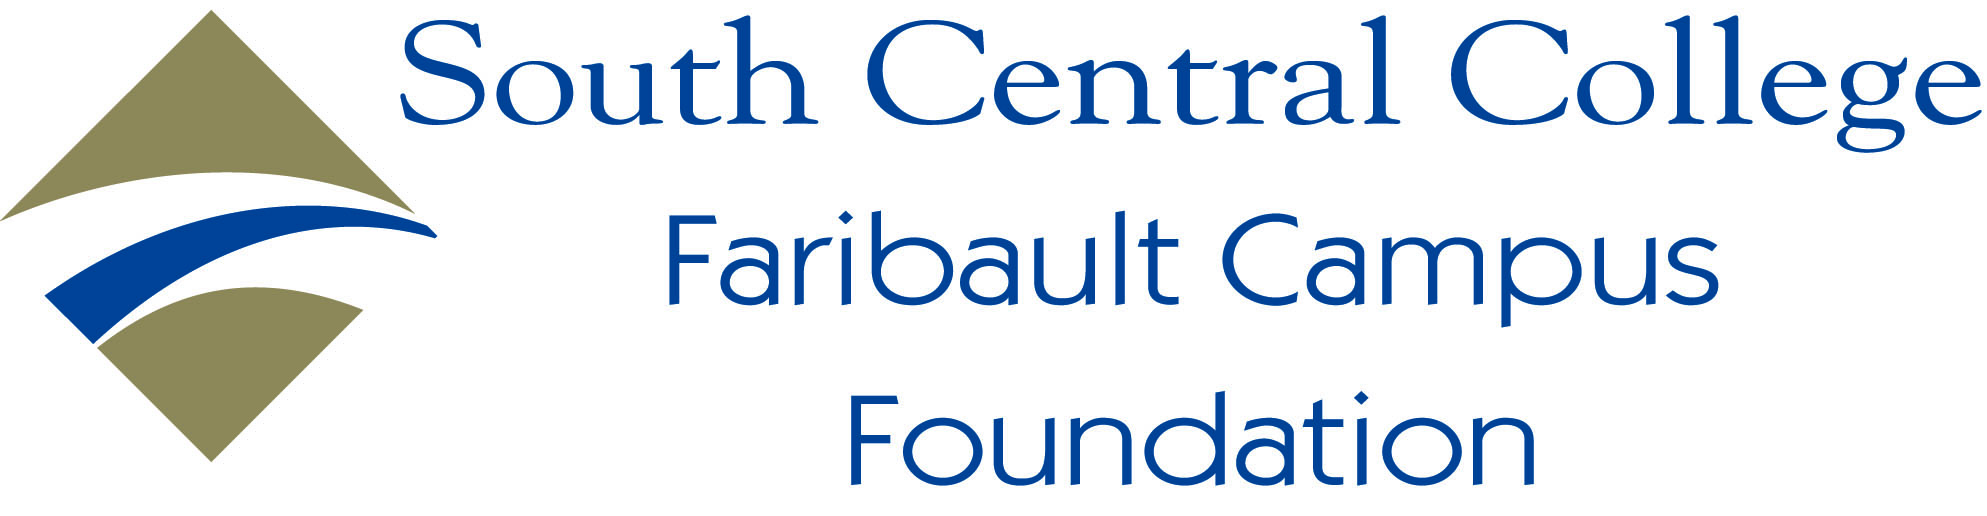 South Central College  Foundation